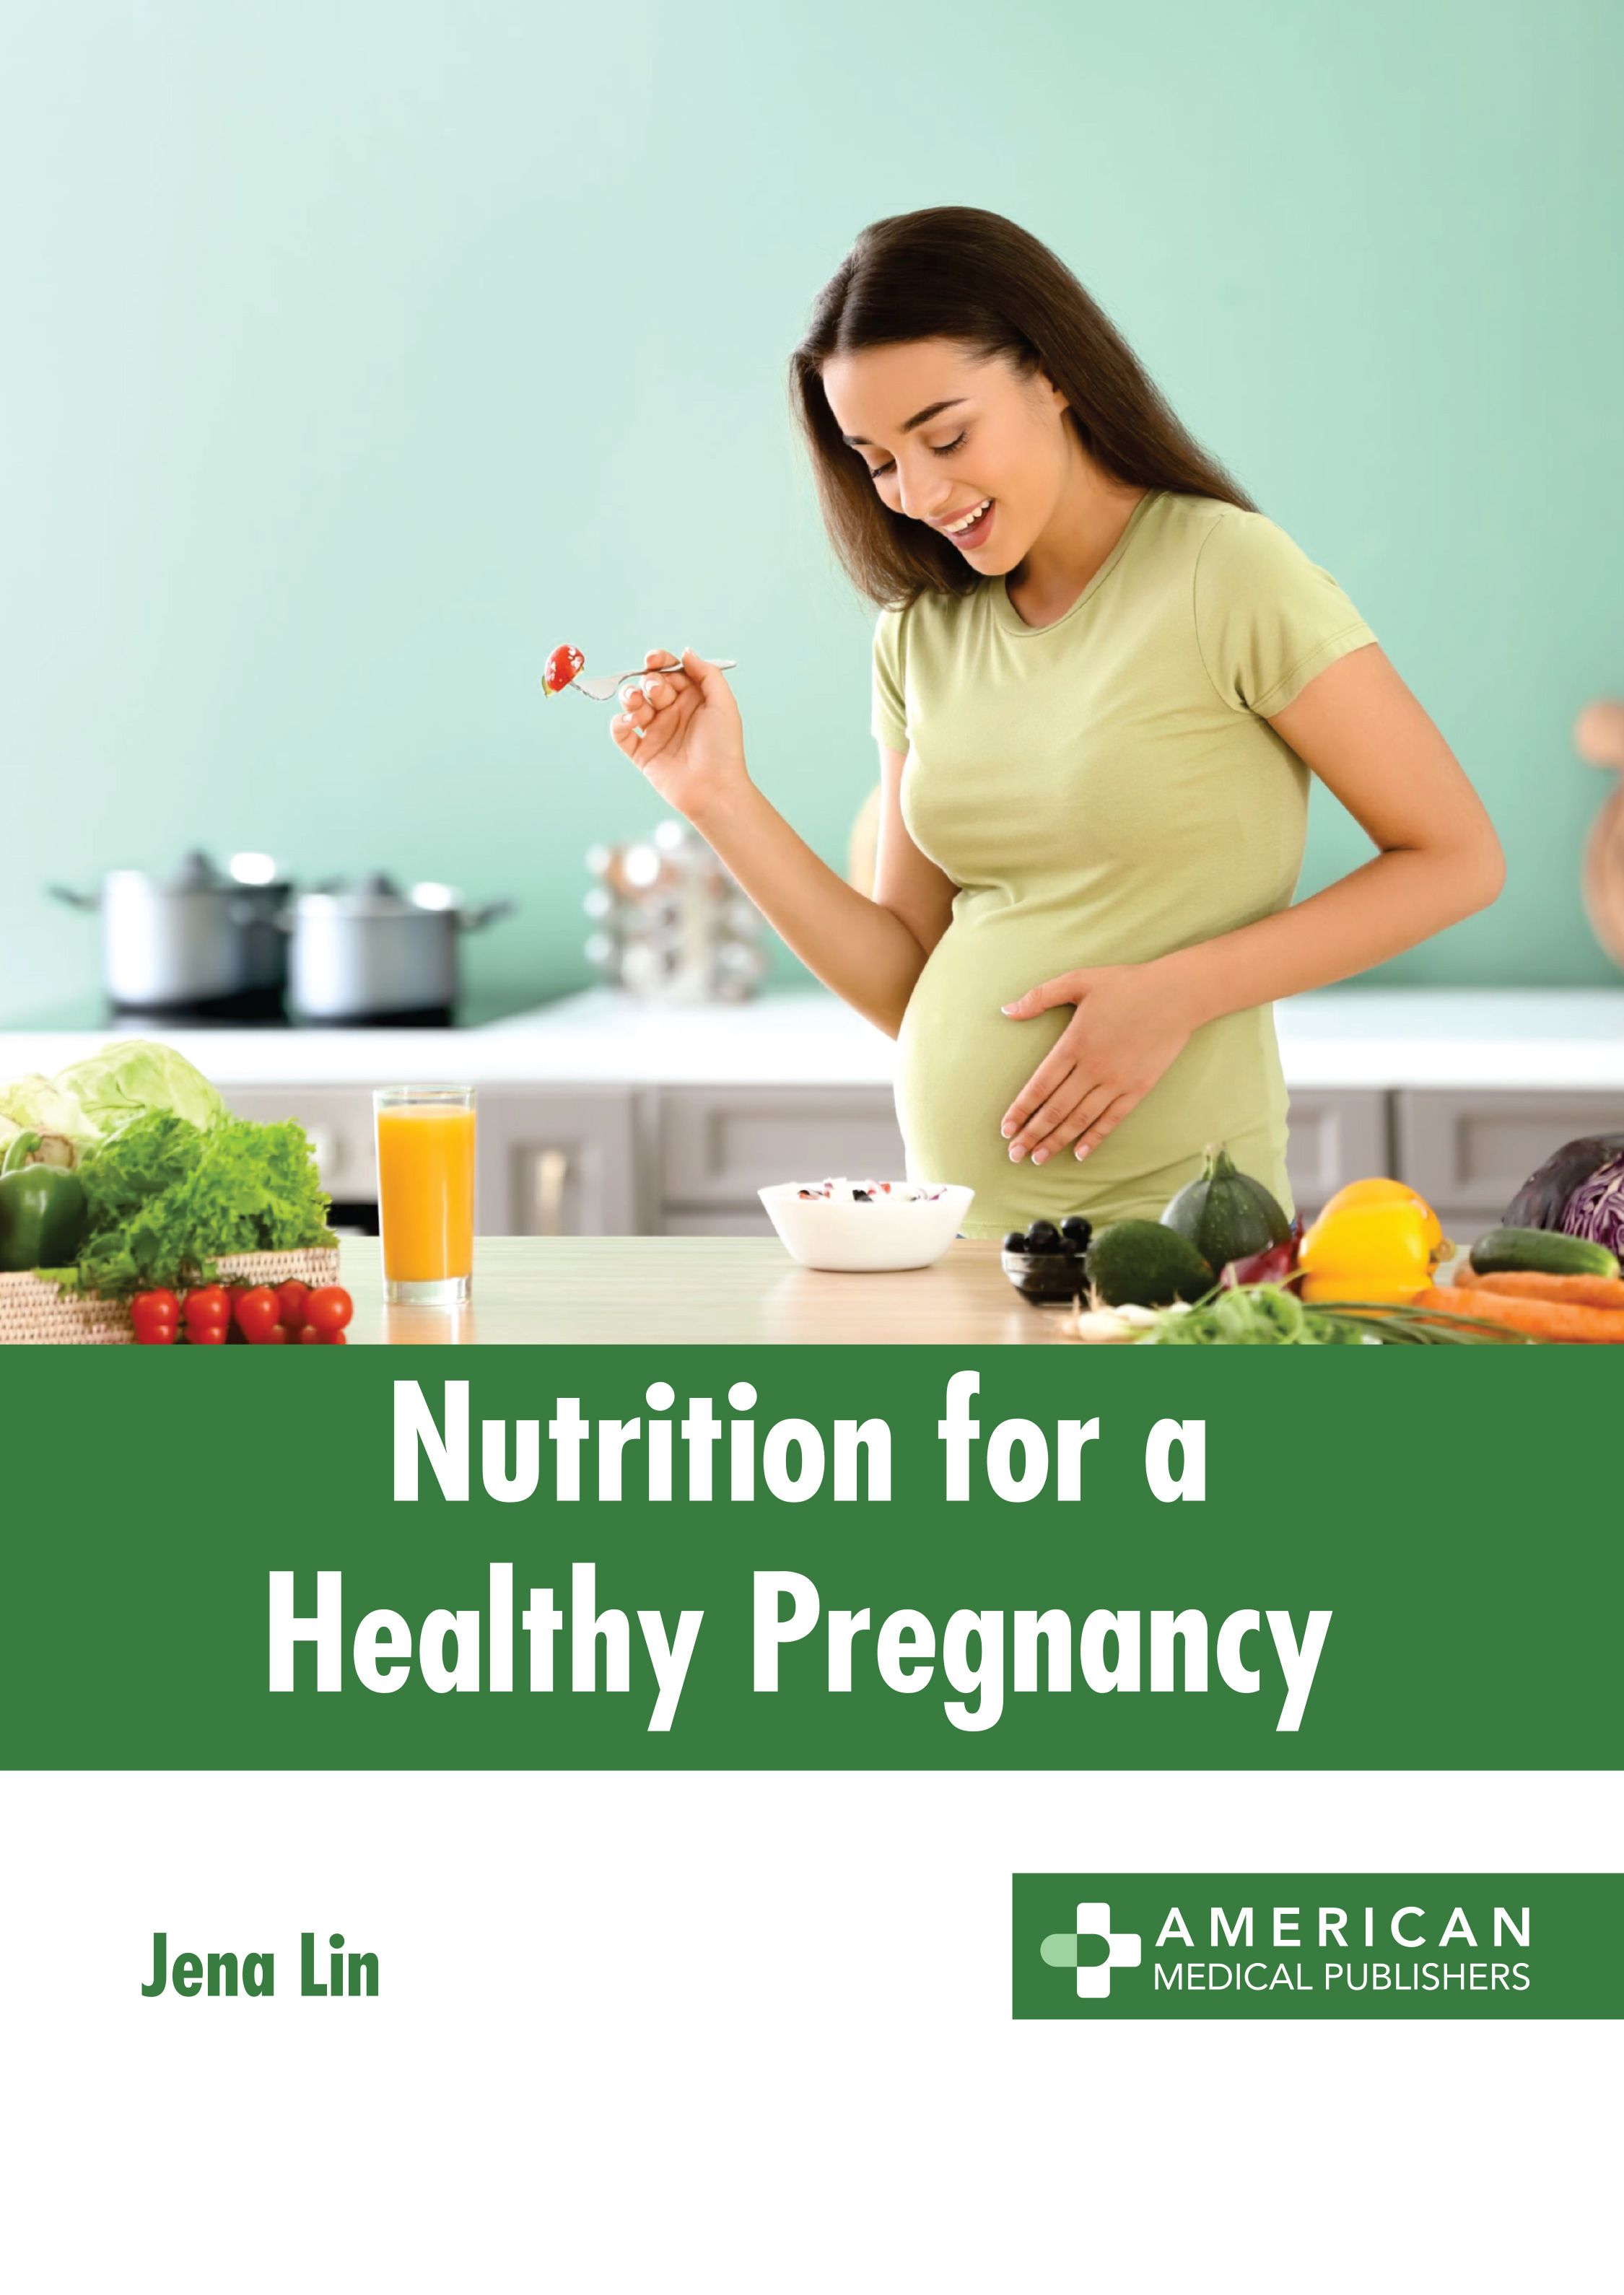 NUTRITION FOR A HEALTHY PREGNANCY